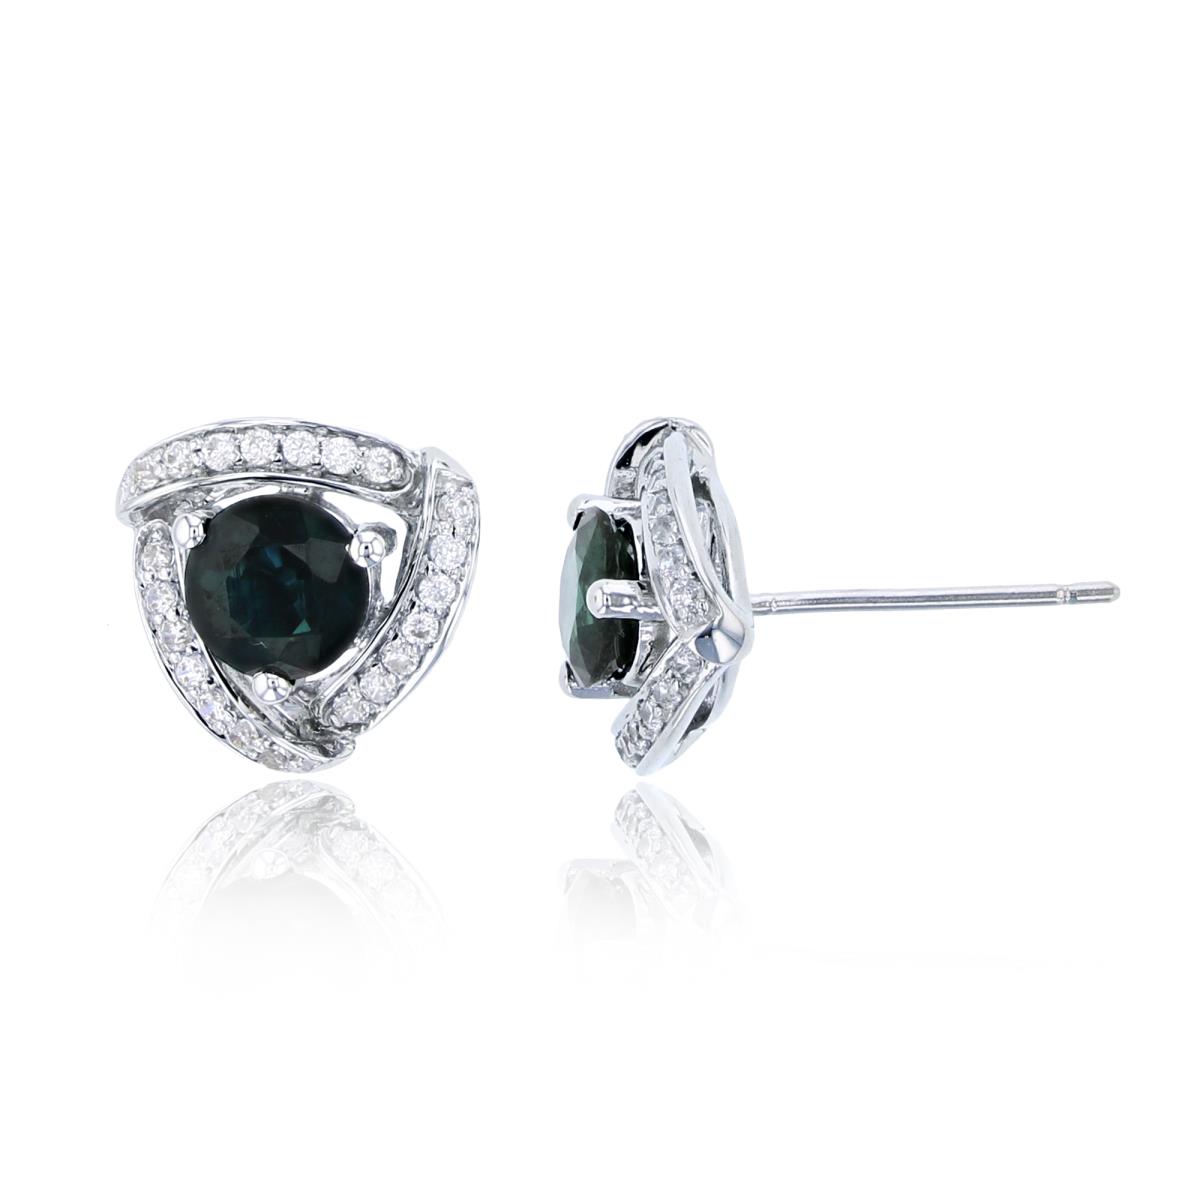 10K White Gold 0.17 CTTW Diamonds & 5mm Rnd Sapphire Triangle Stud Earring with Silicone Back